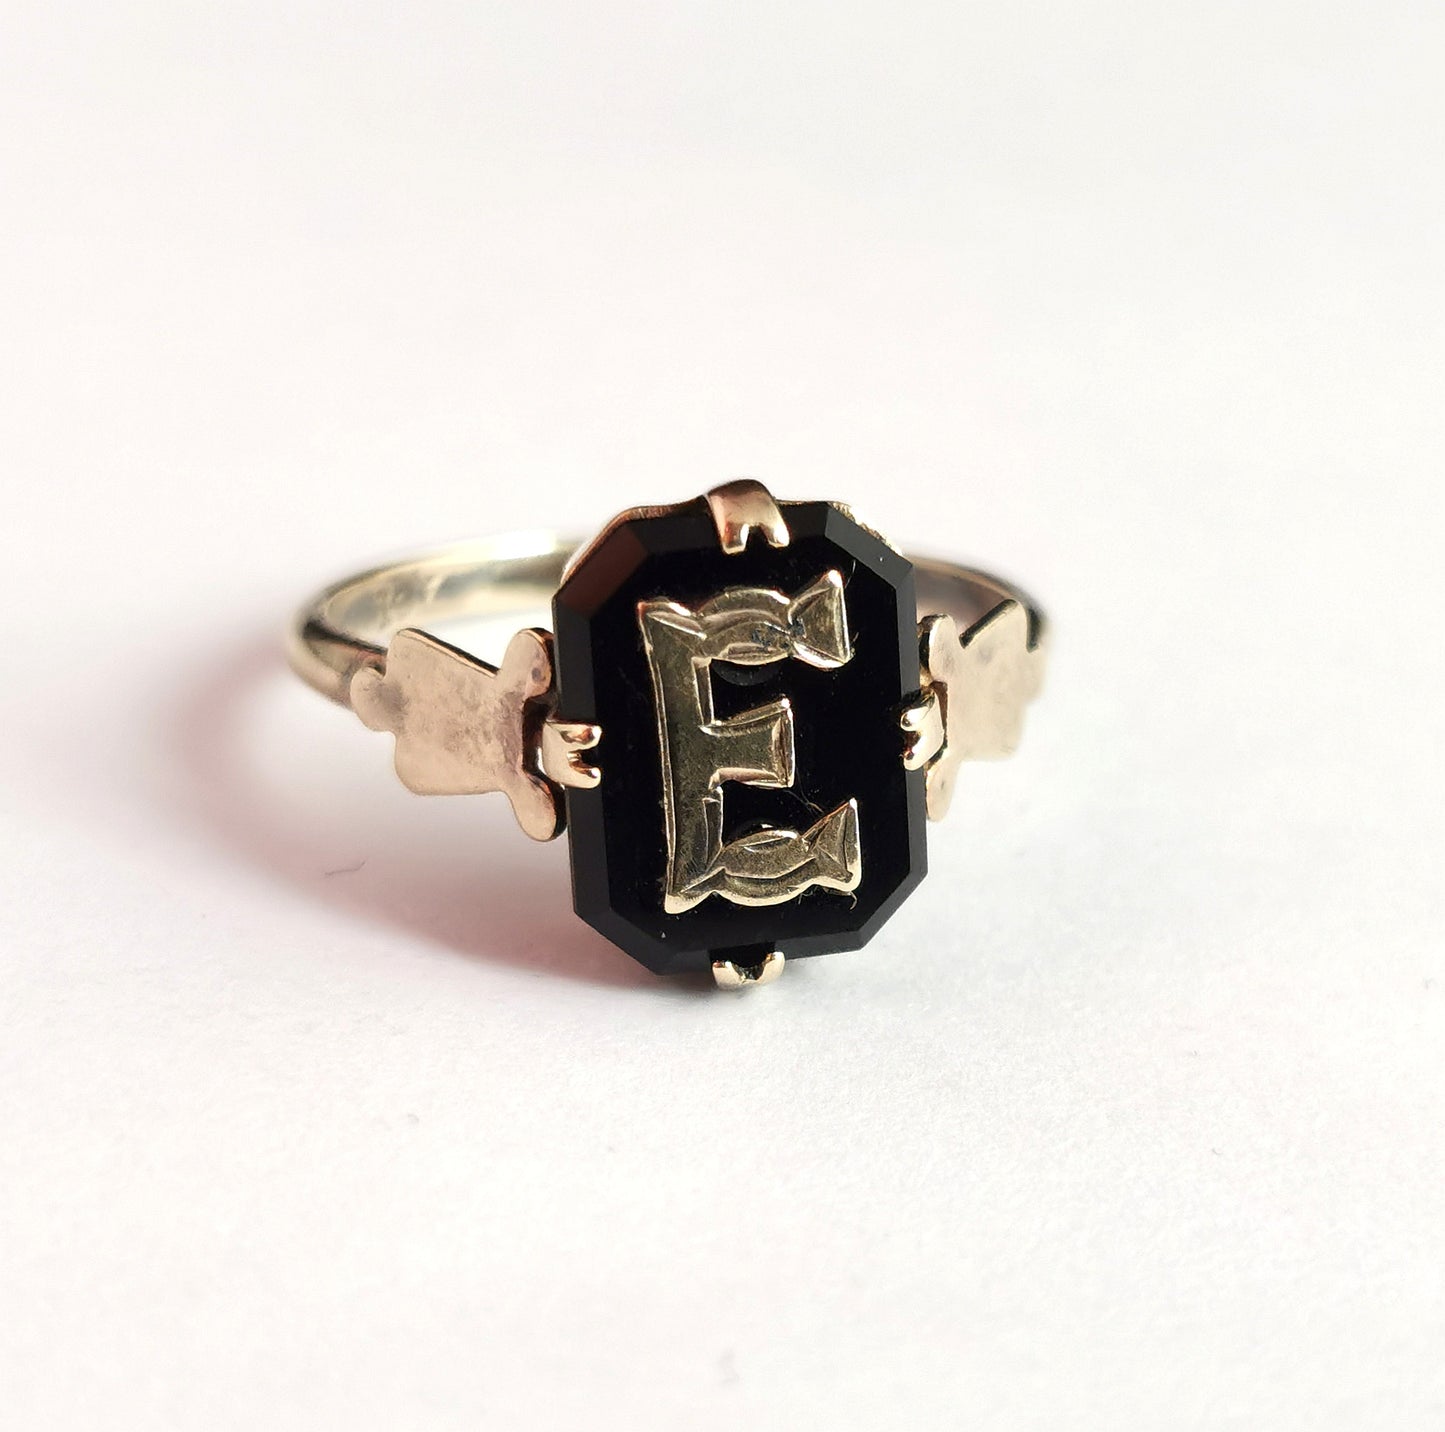 Antique onyx mourning ring, initial E, 9ct gold, Victorian